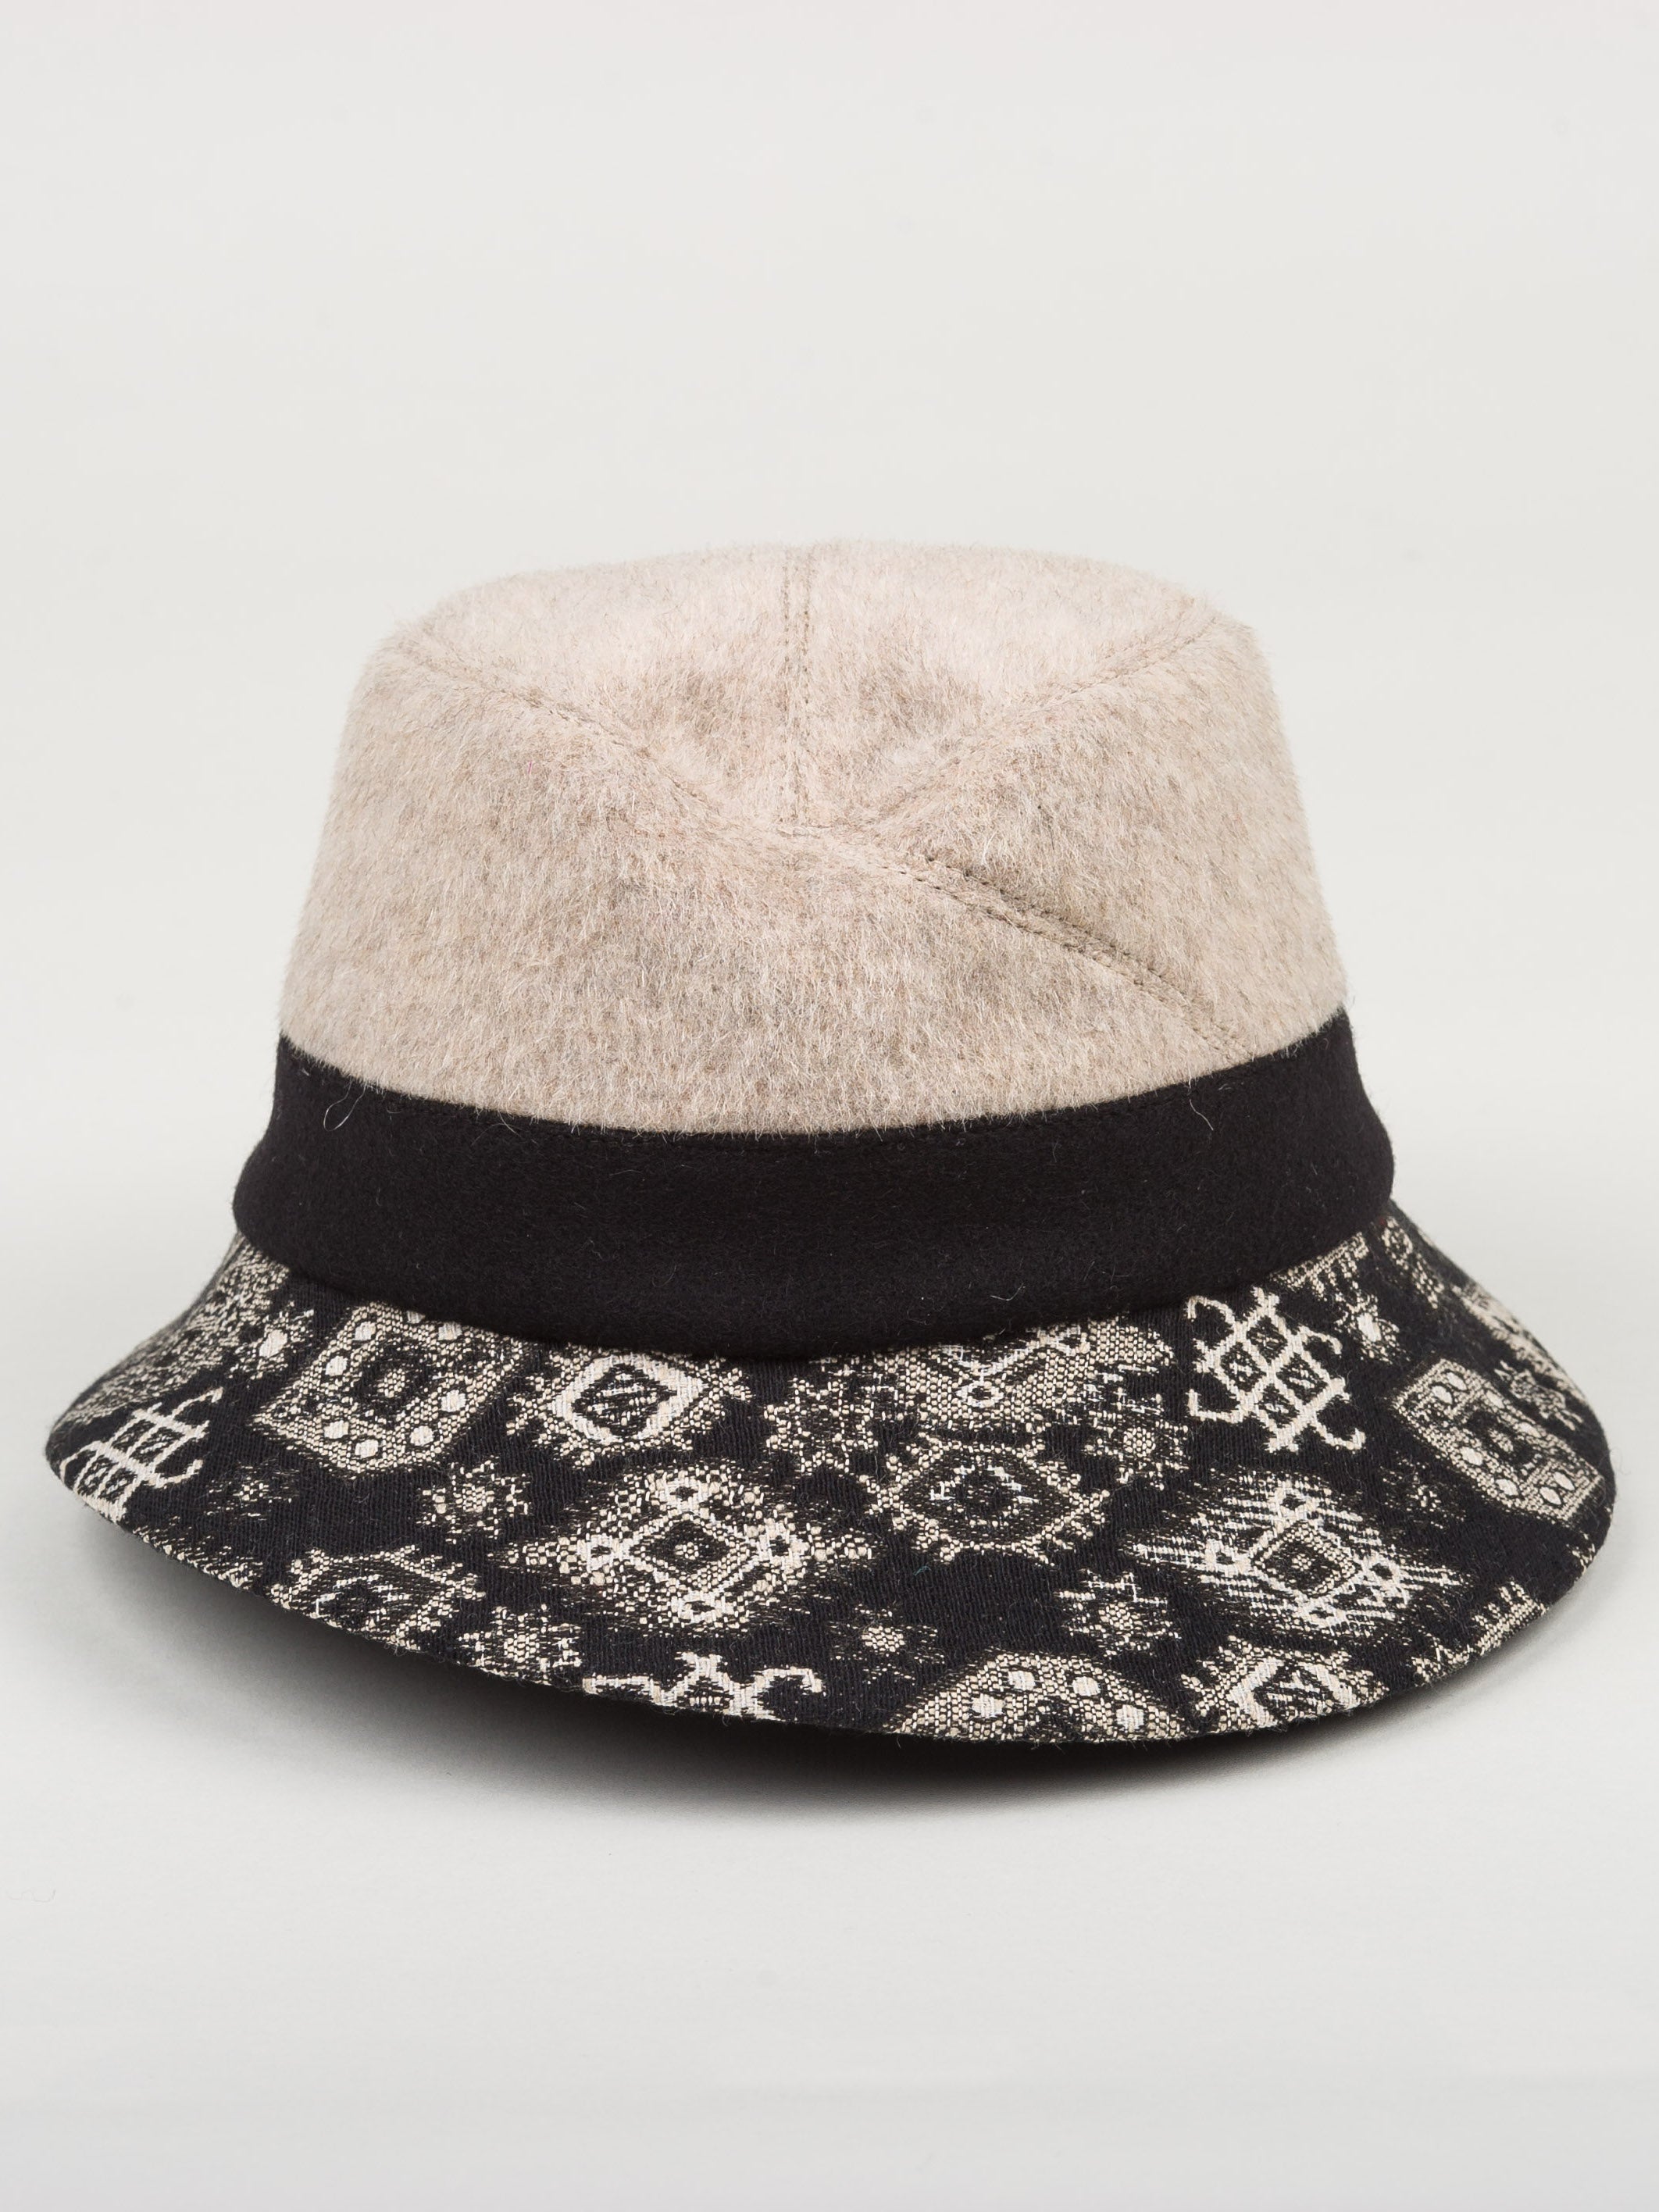 Front view of the lillie & cohoe morocco alexa hat. This hat is beige with a black band around the crown. The short brim has a black and beige print.